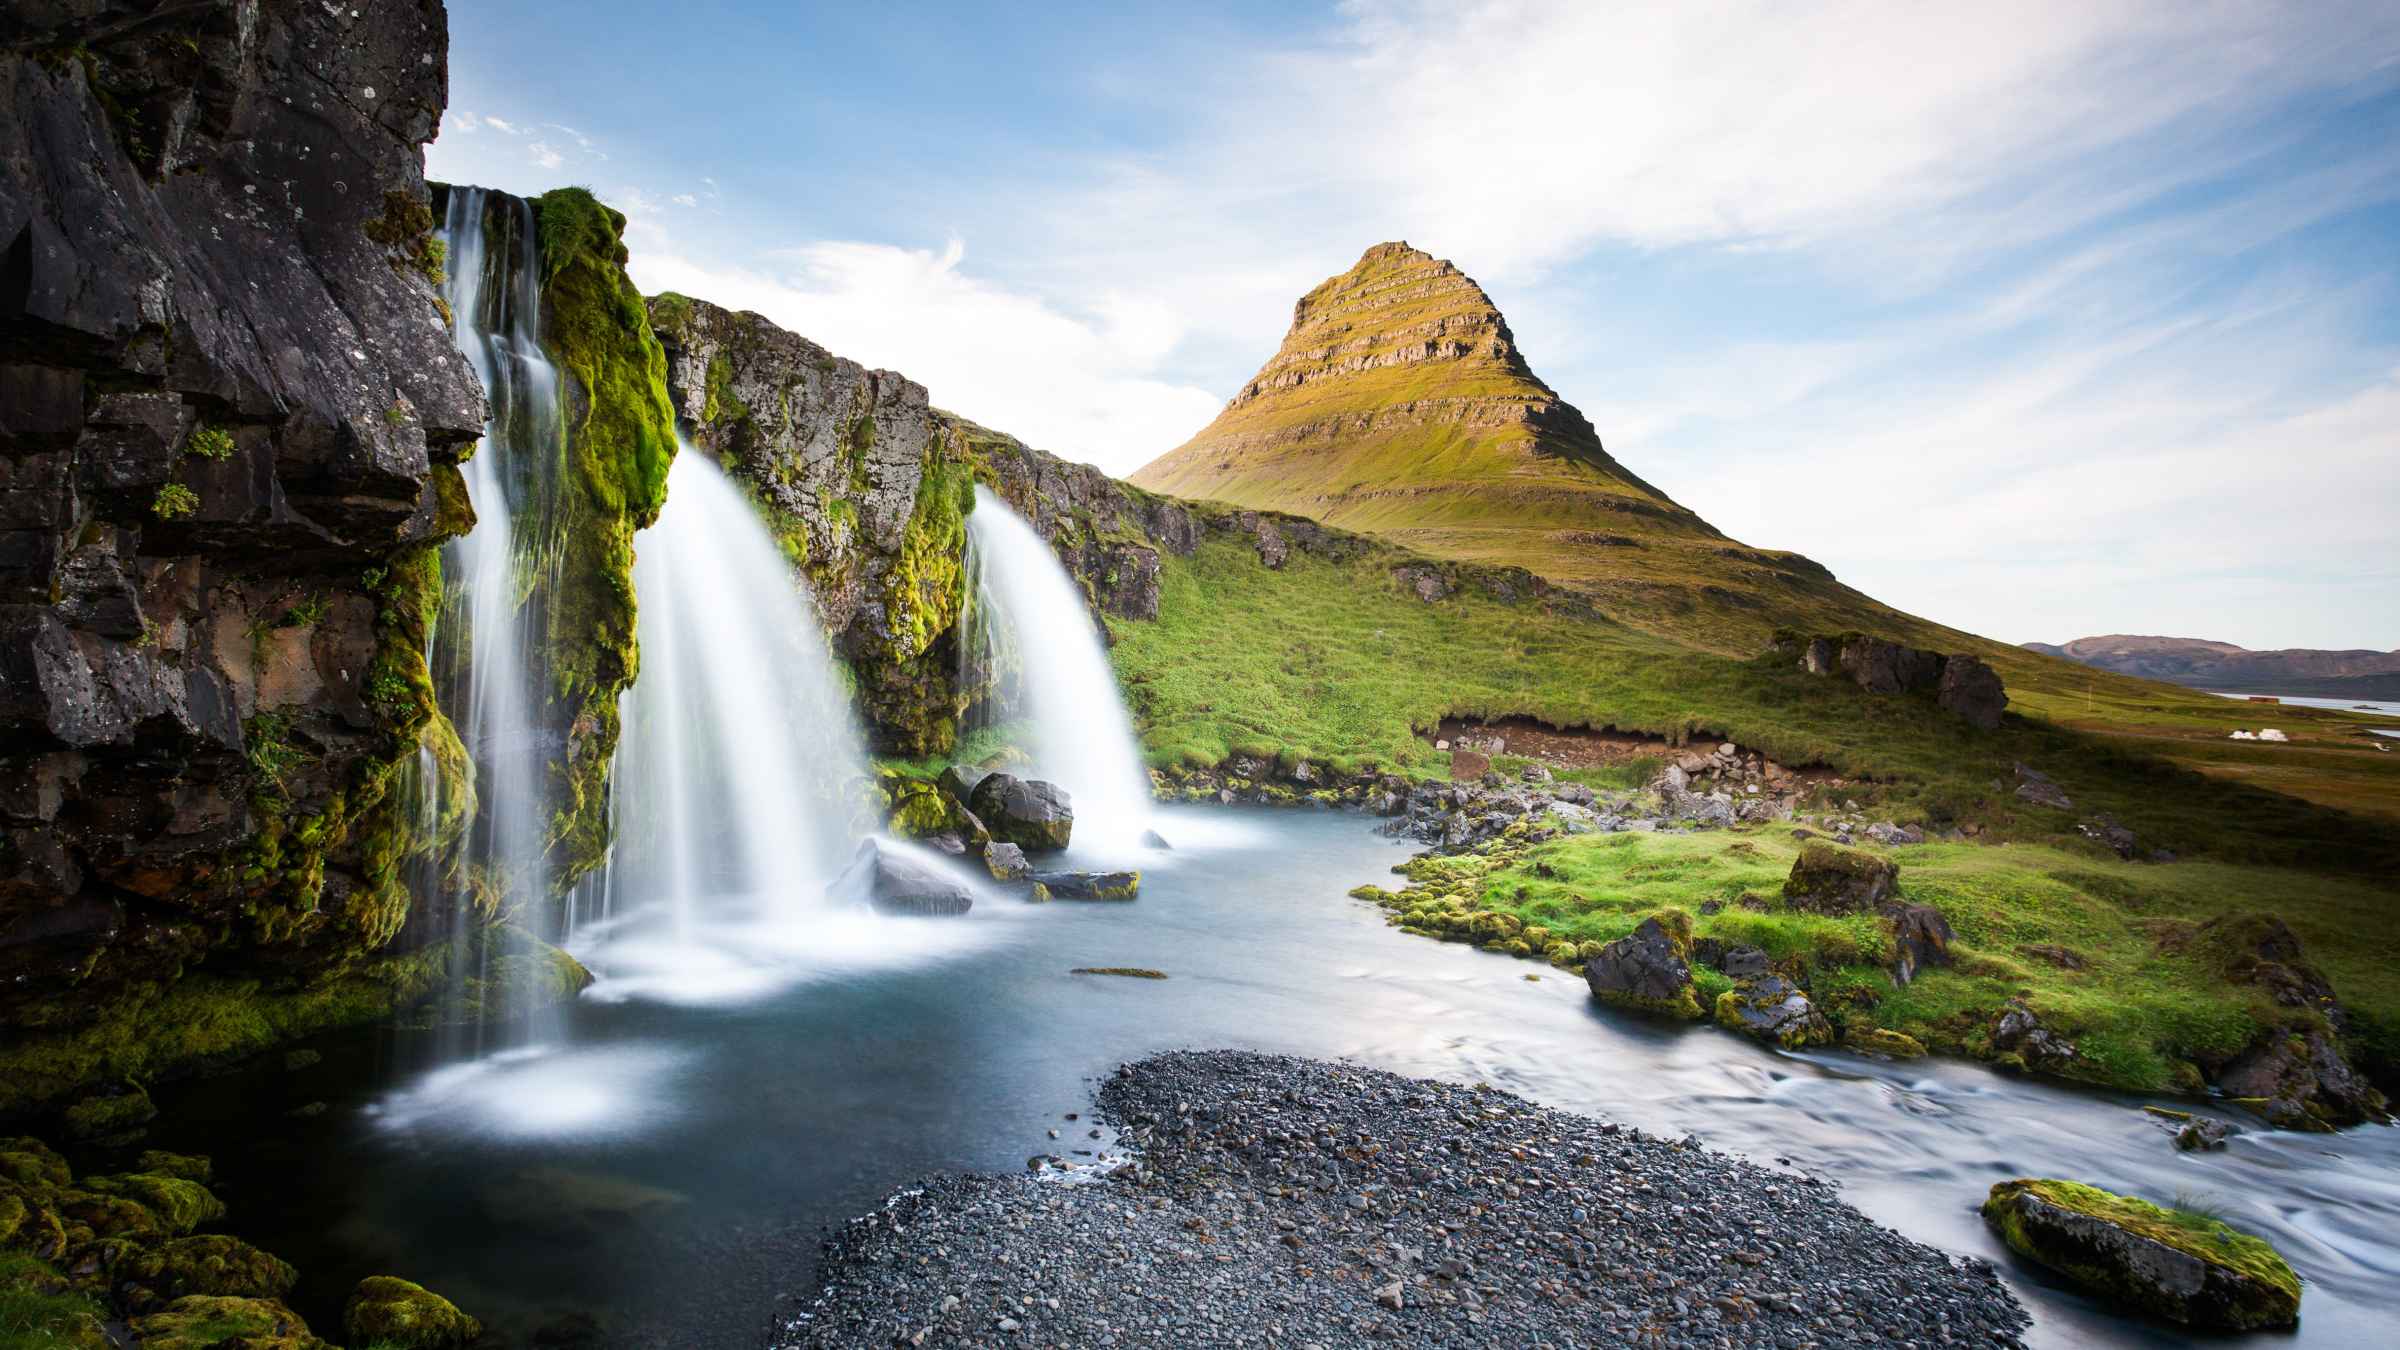 The BEST Grundarfjörður Tours and Things to Do in 2022 - FREE Cancellation | GetYourGuide